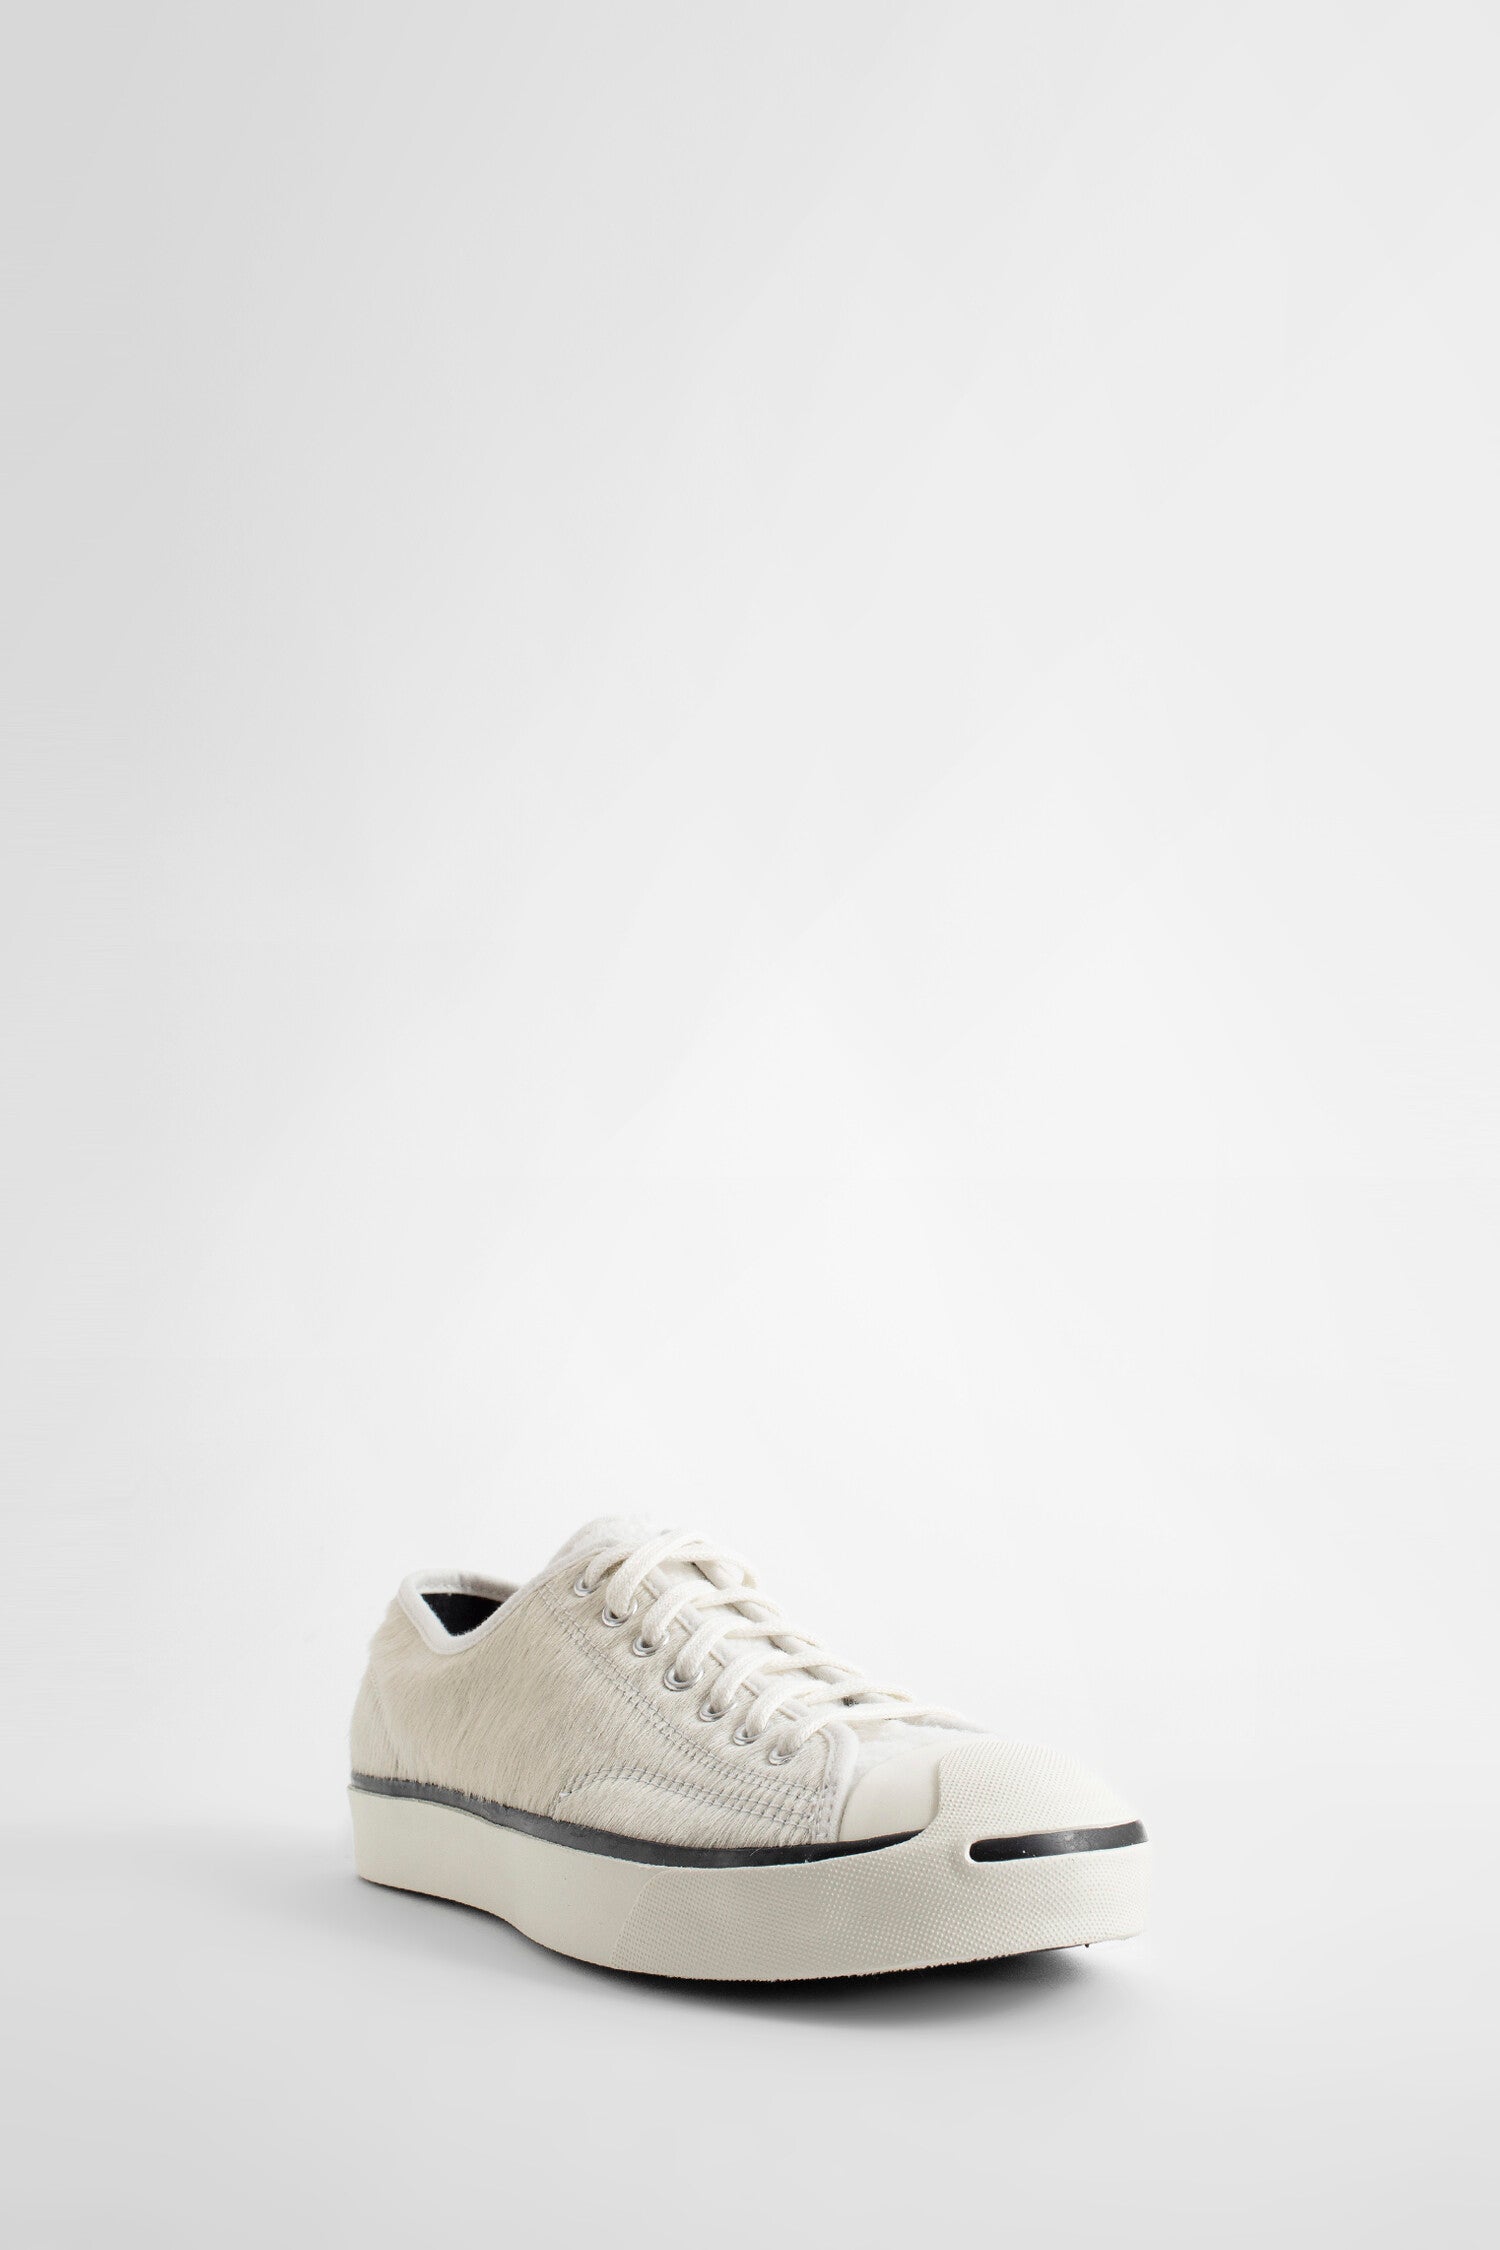 Converse x Clot white Jack Purcell sneakers